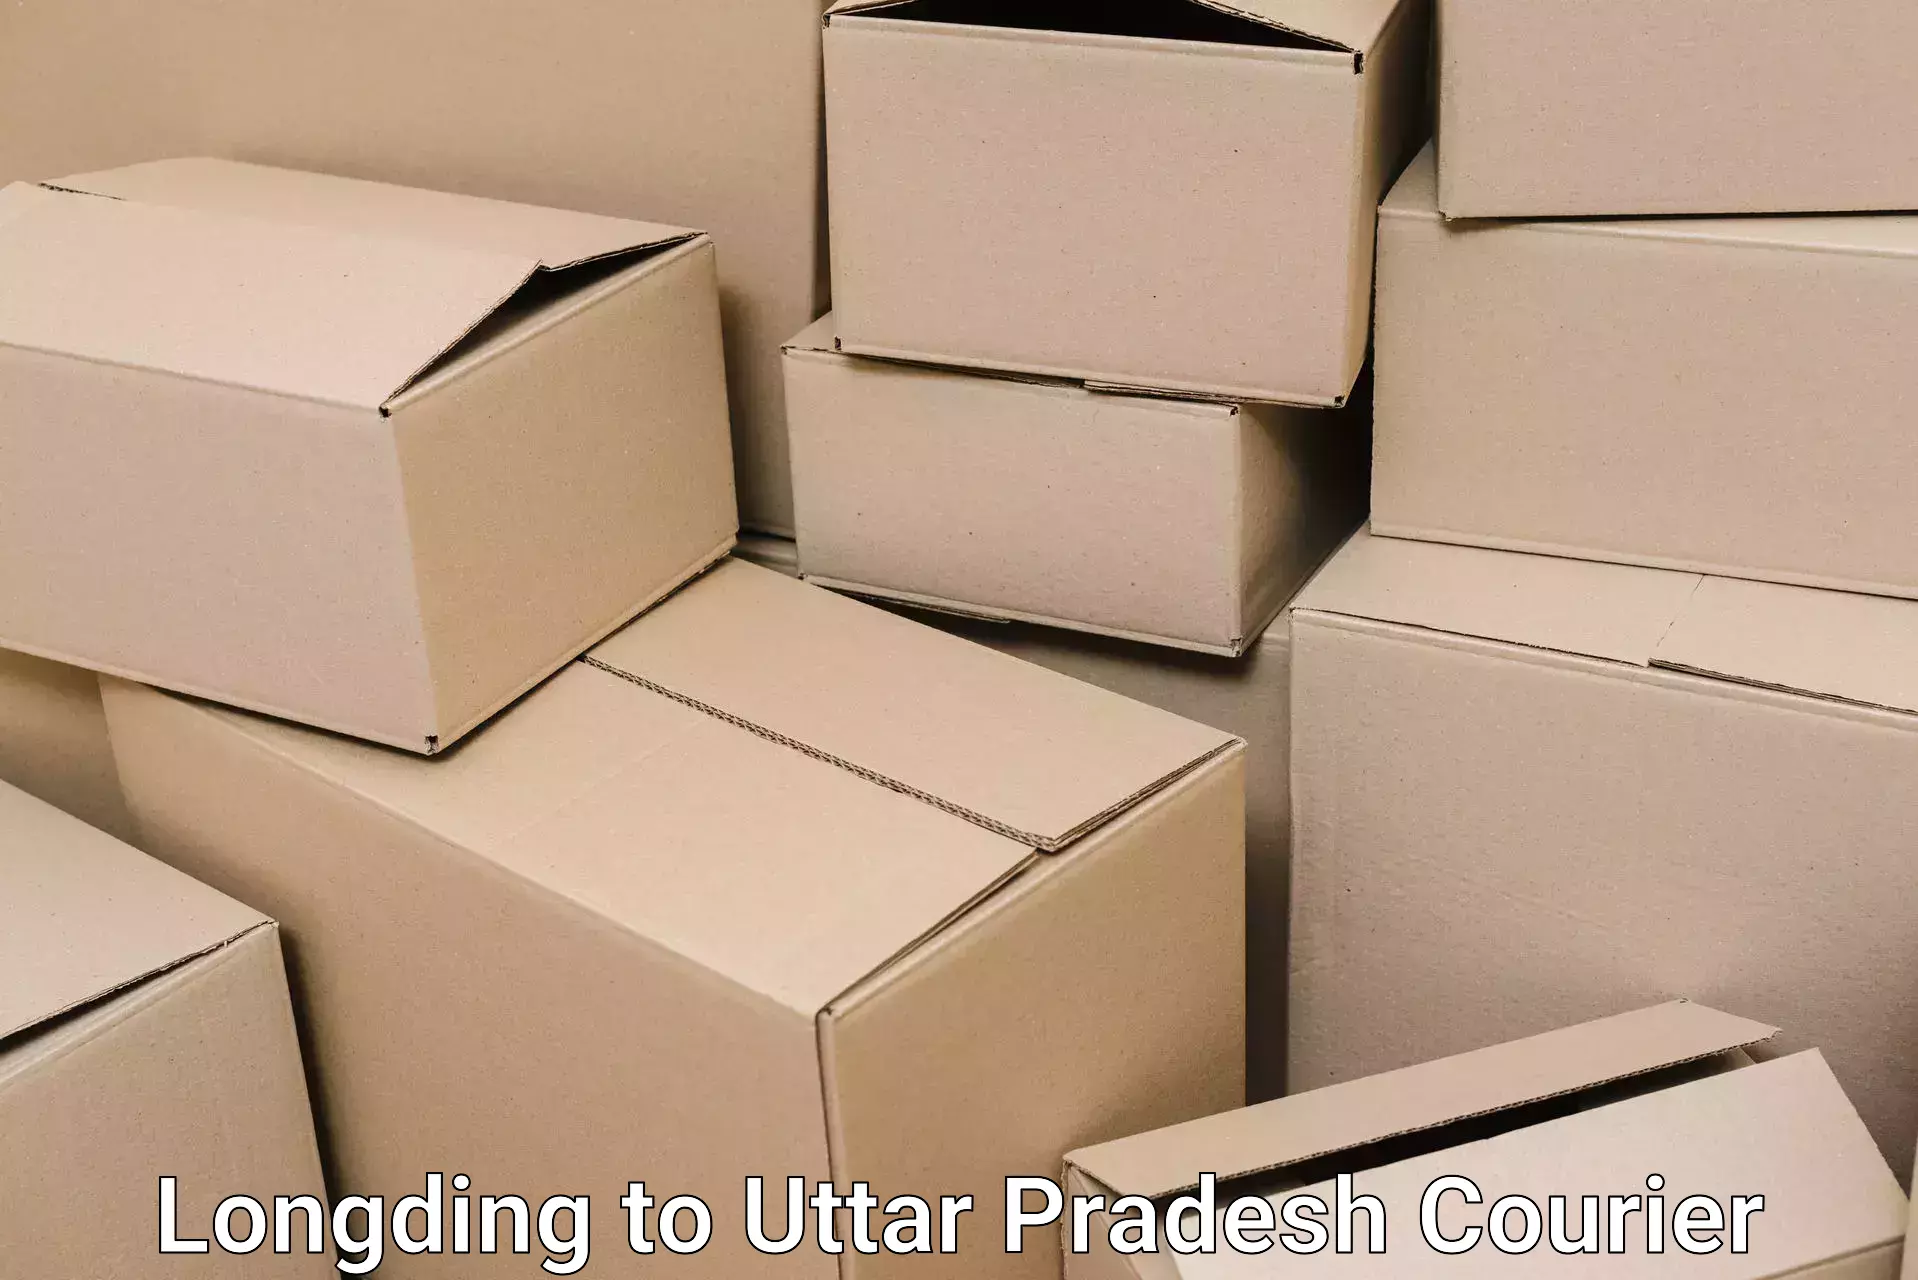 Residential moving experts Longding to Hapur